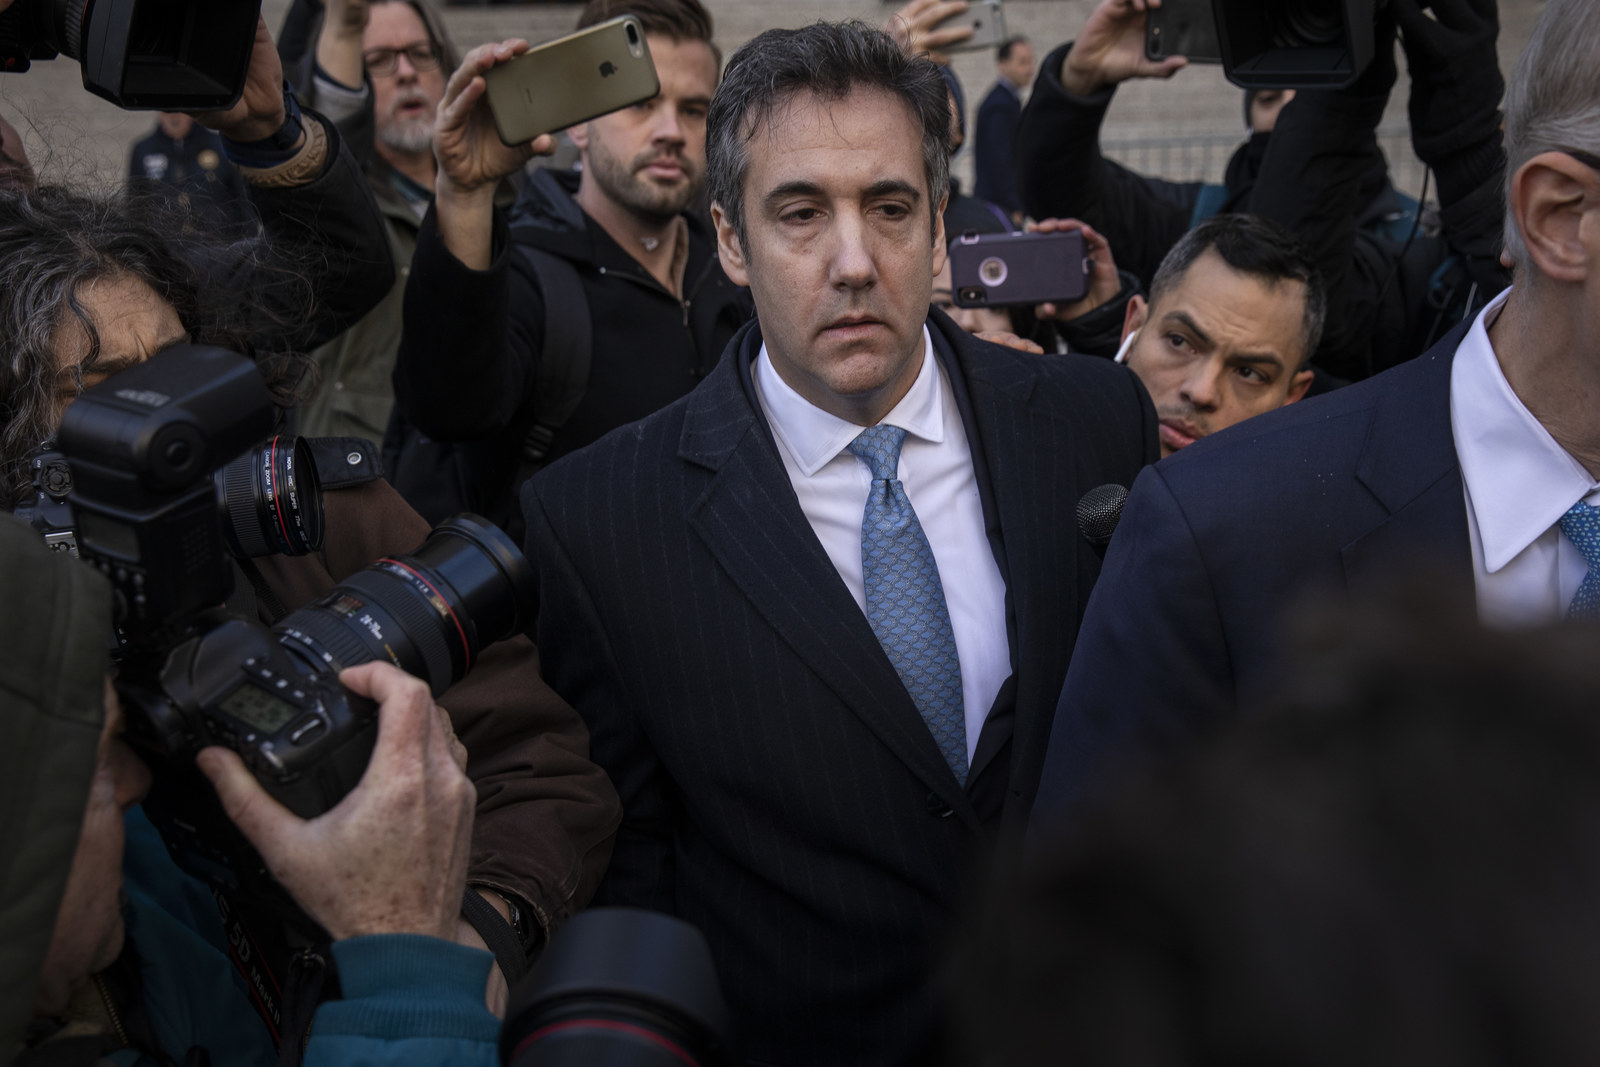 Michael Cohen, former personal attorney to President Donald Trump, exits federal court, on Nov. 29 in New York City.